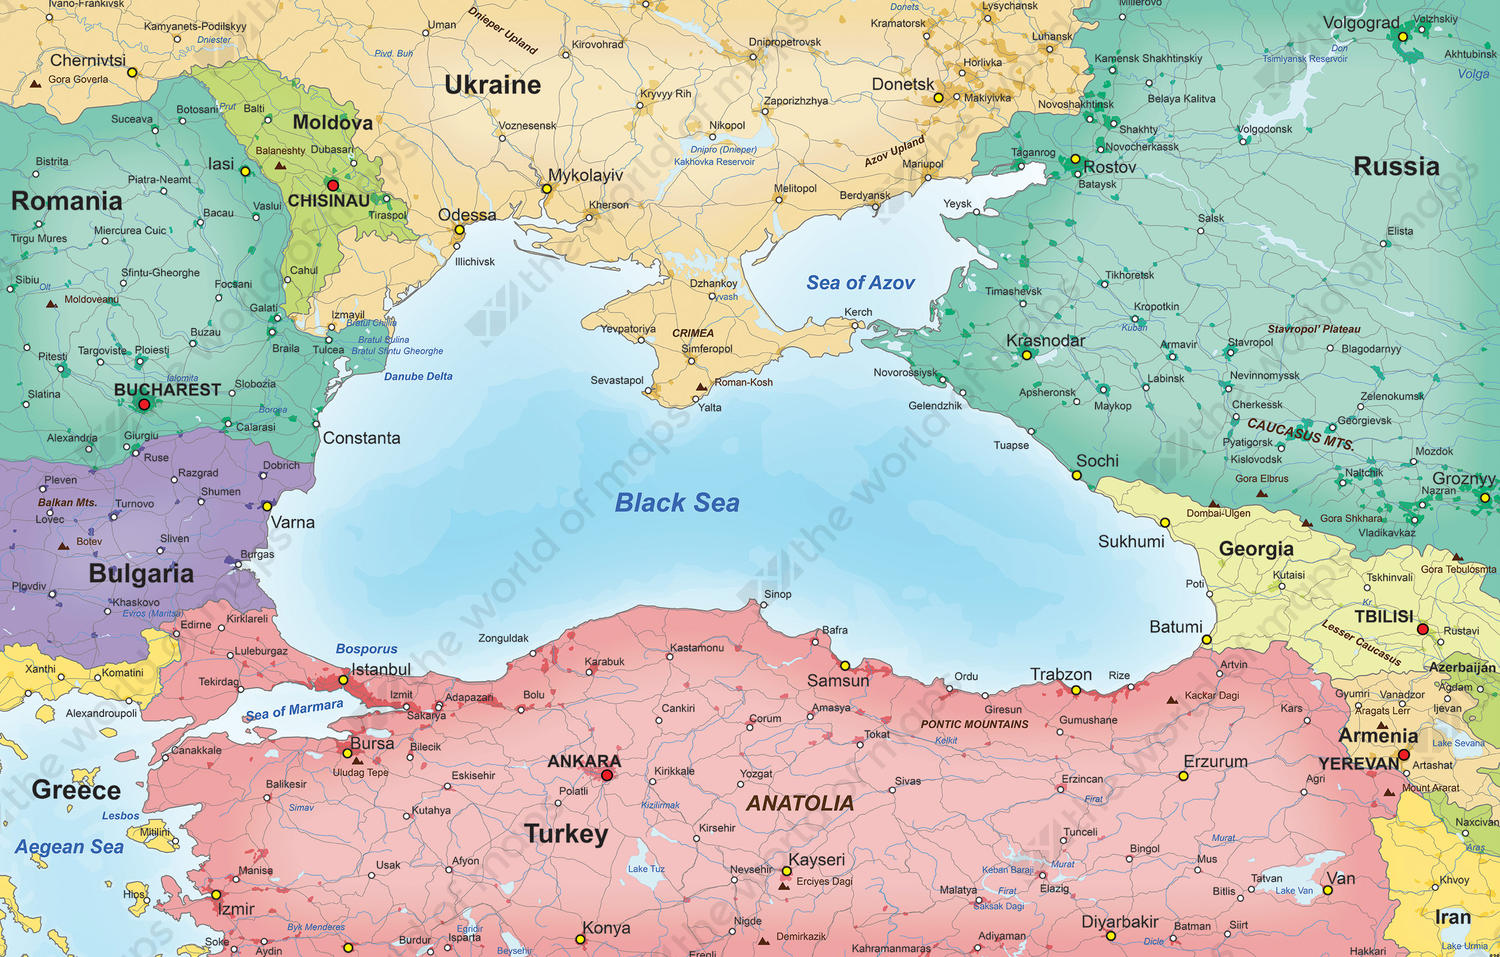 black sea on world map Digital Map Countries Around The Black Sea 838 The World Of Maps Com black sea on world map